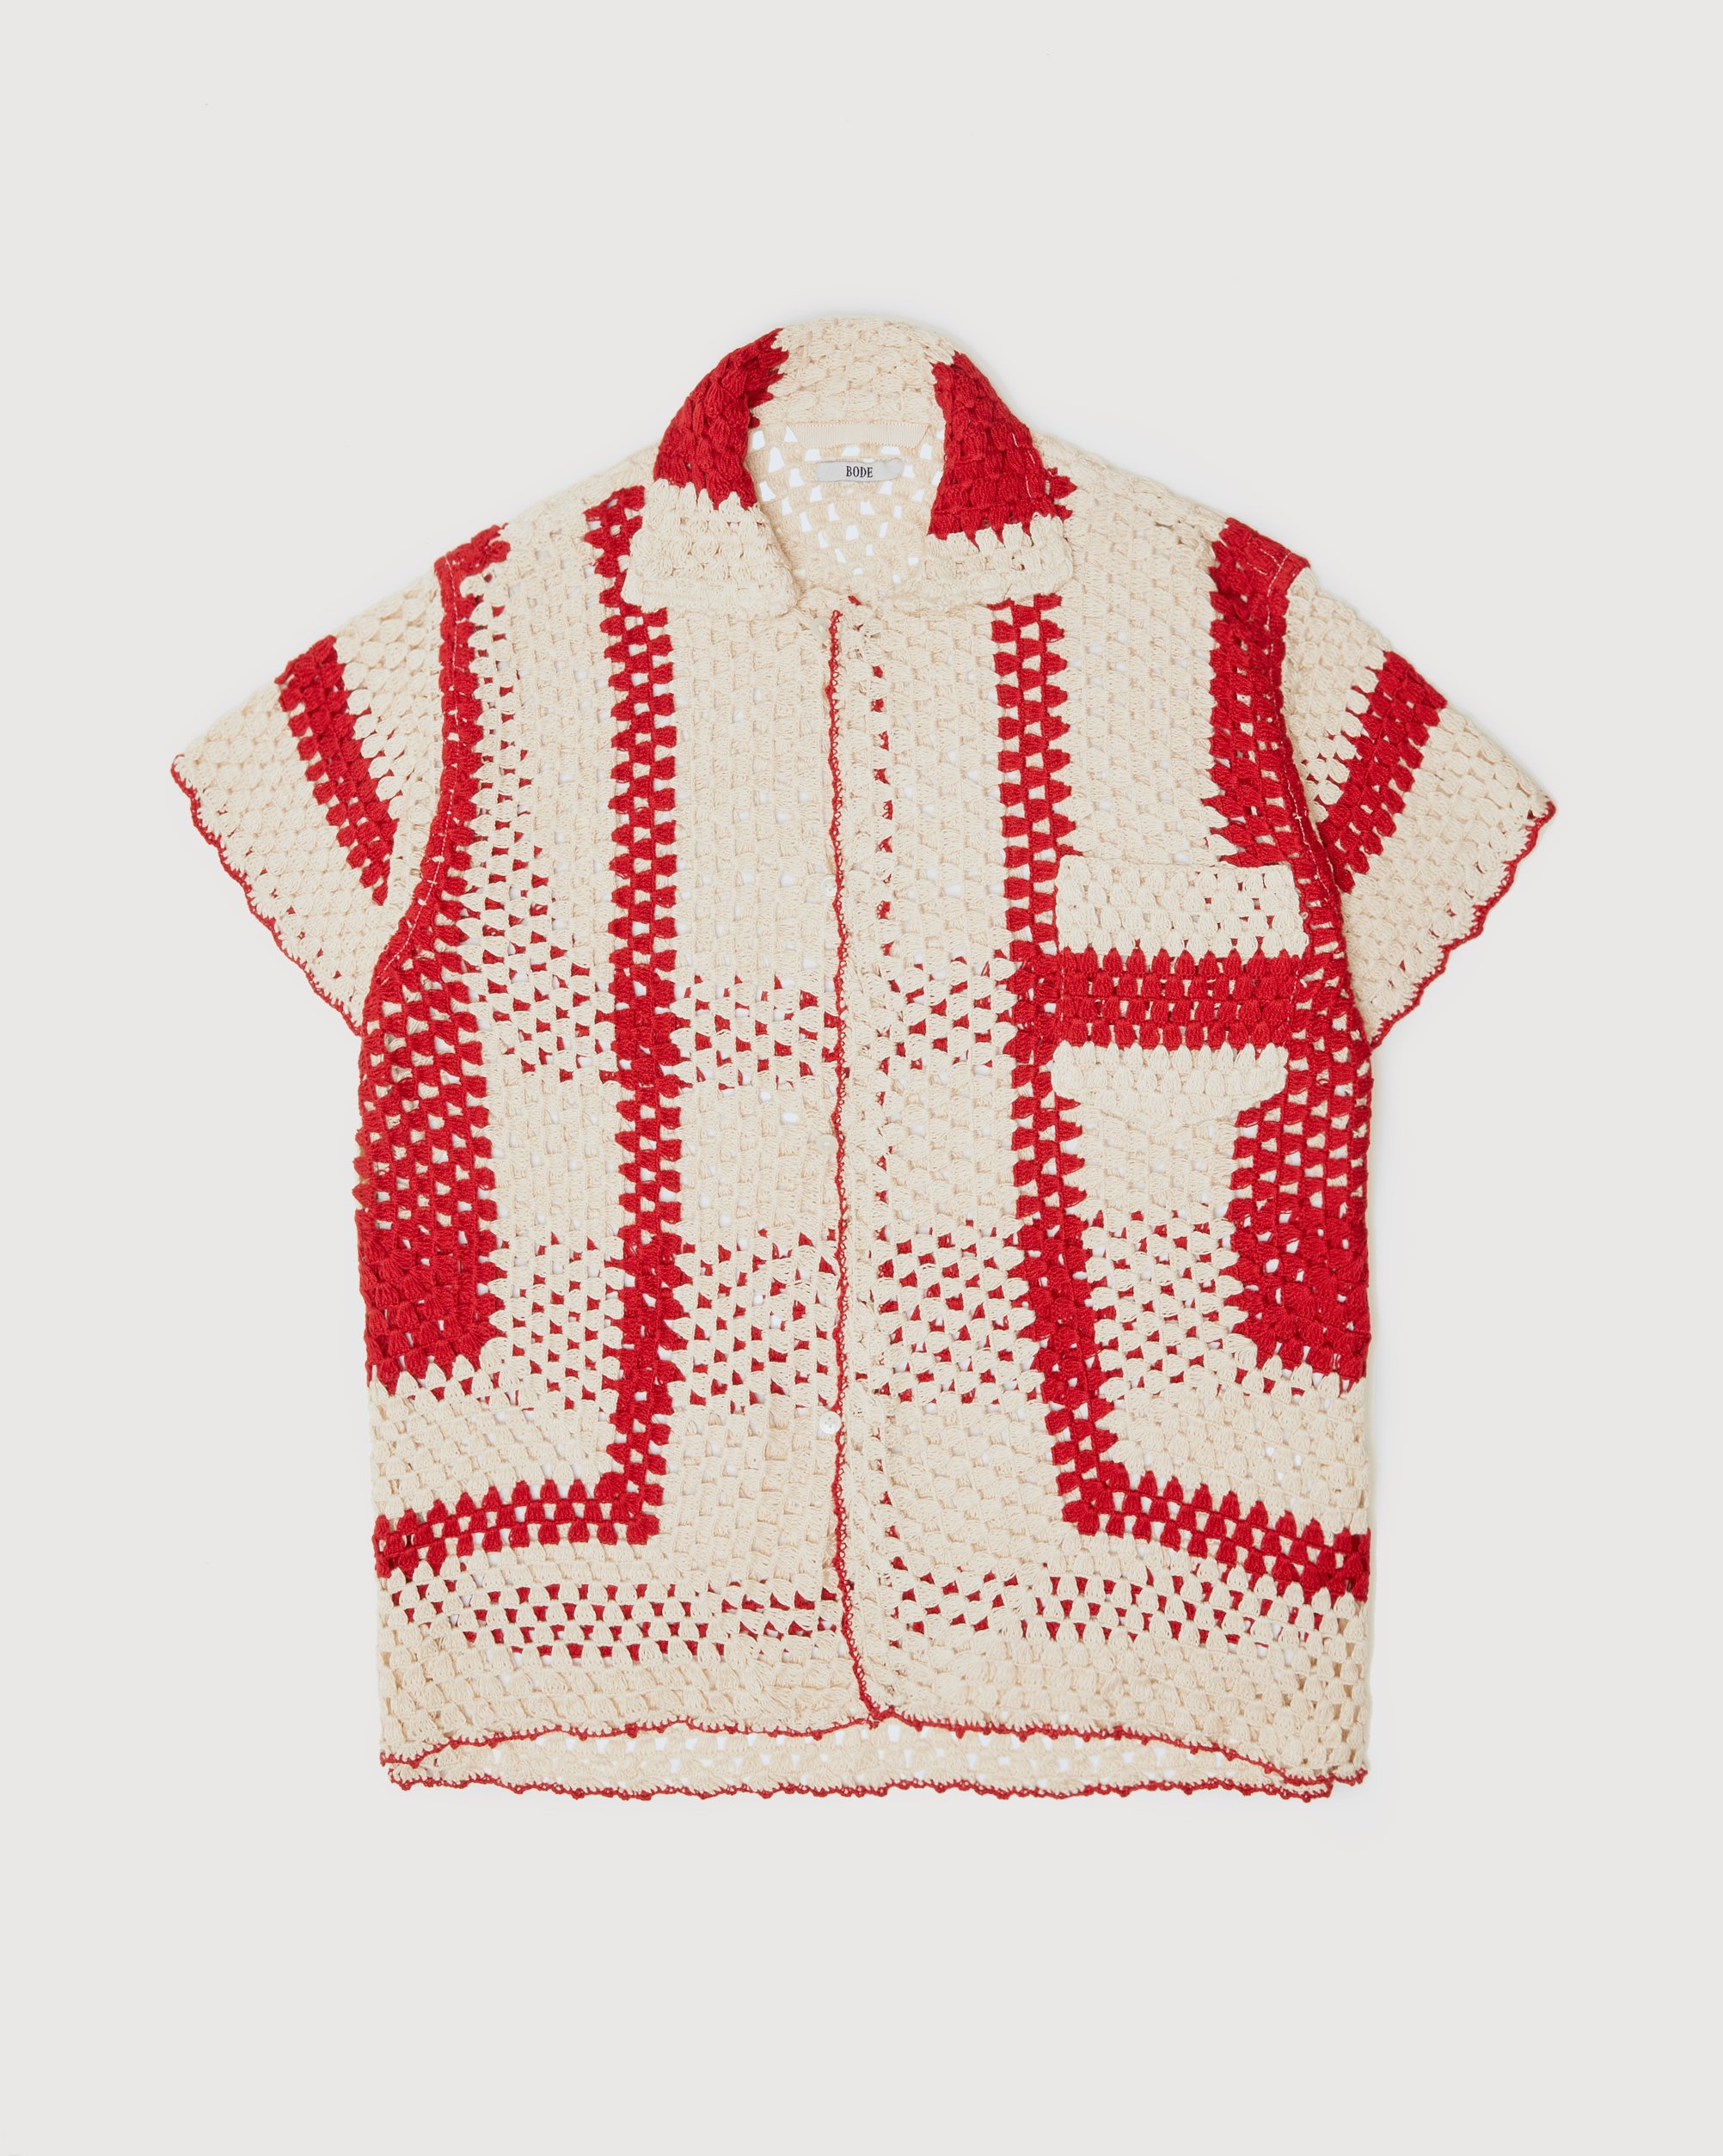 Bode - Crochet Big Top Shirt White Red - Clothing - Beige - Image 1